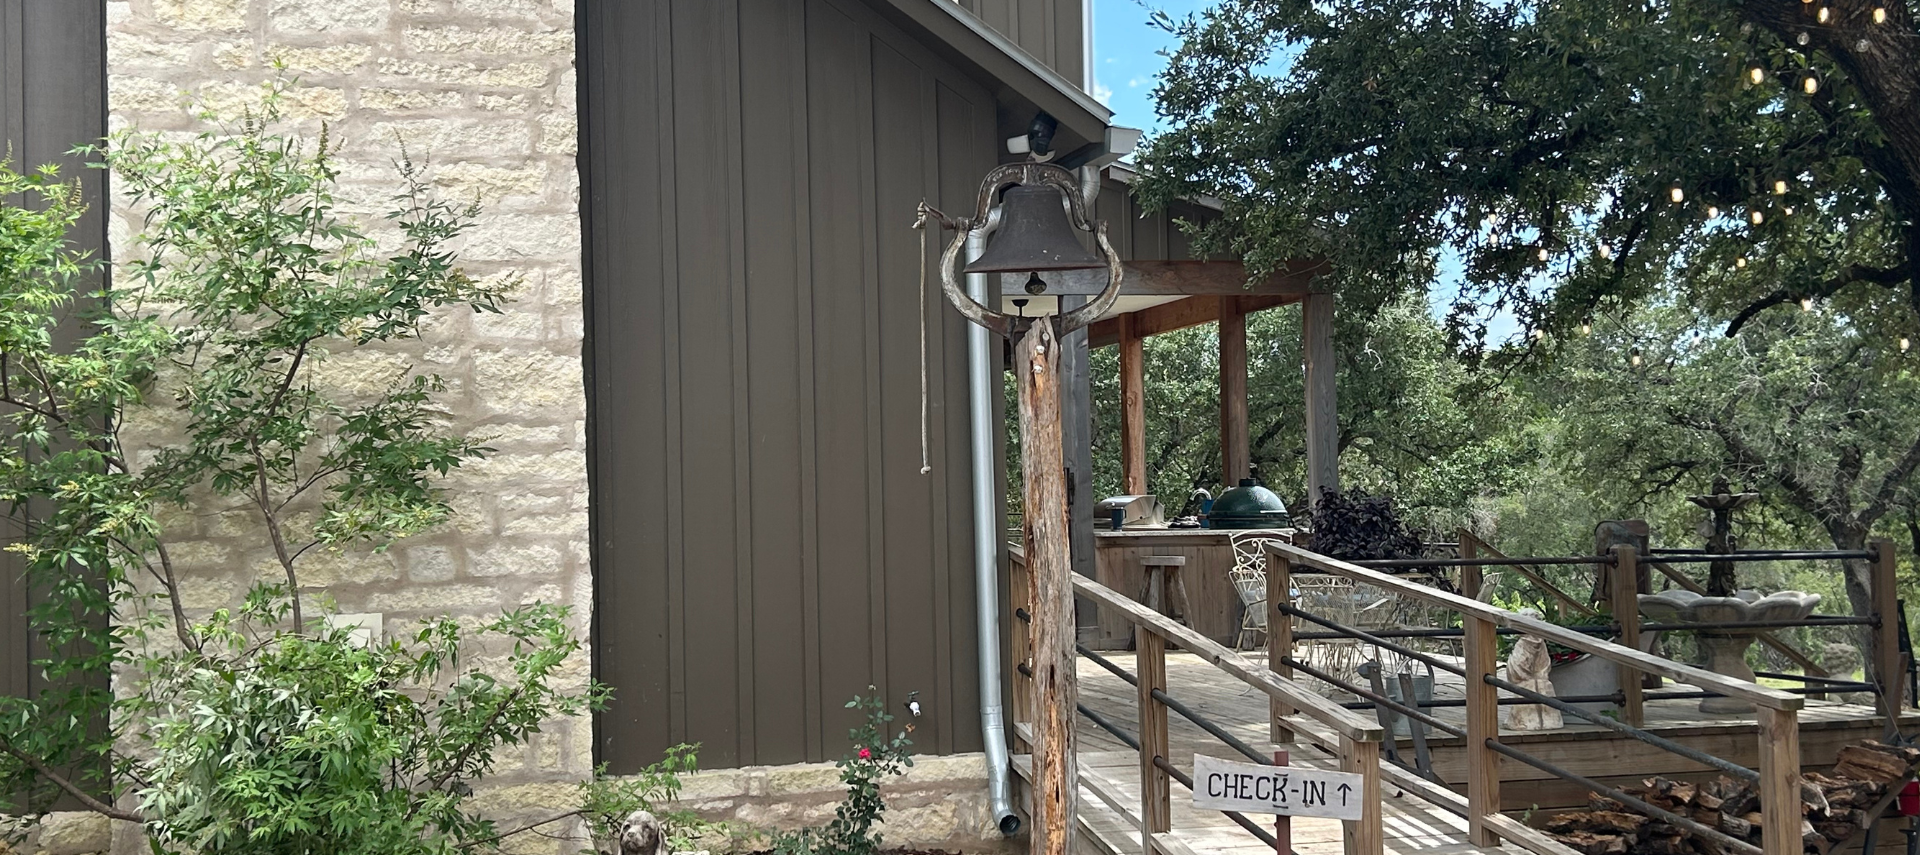 Image of the dinner bell at Inn at Sunset Mill Ranch in Wimberley Texas